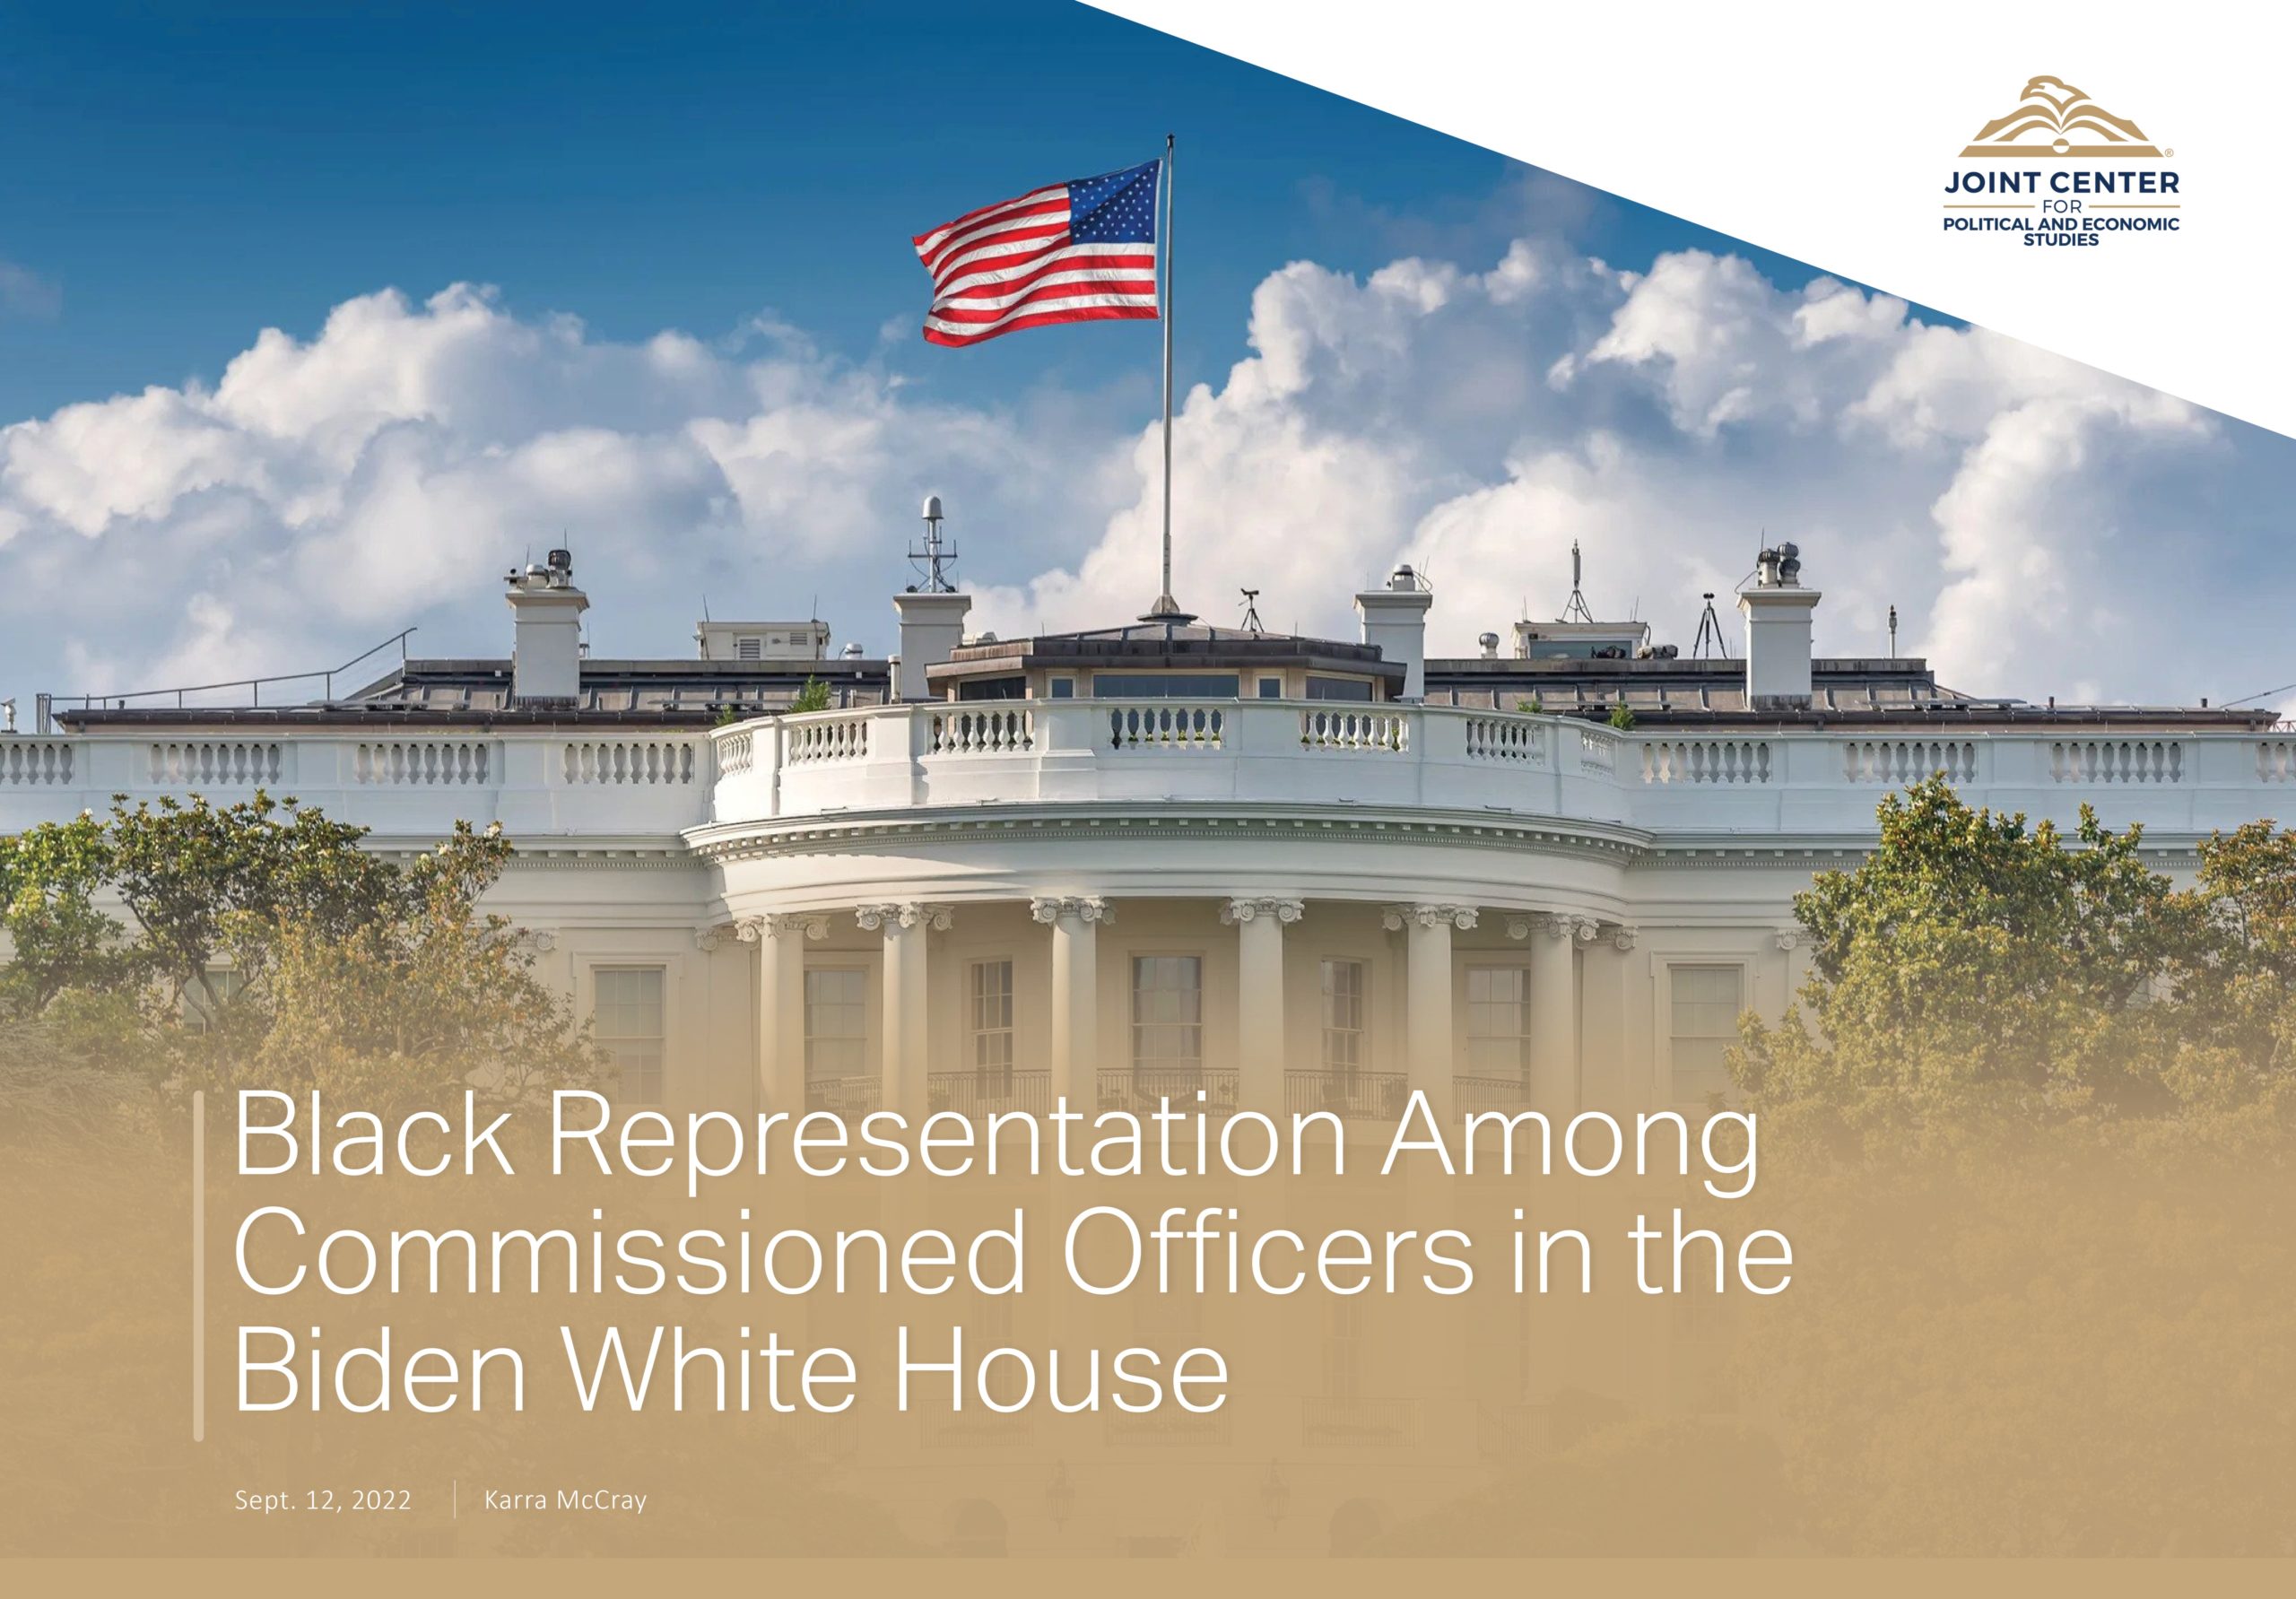 JC_Black Representation Among Commissioned Officers in the Biden White House Cover